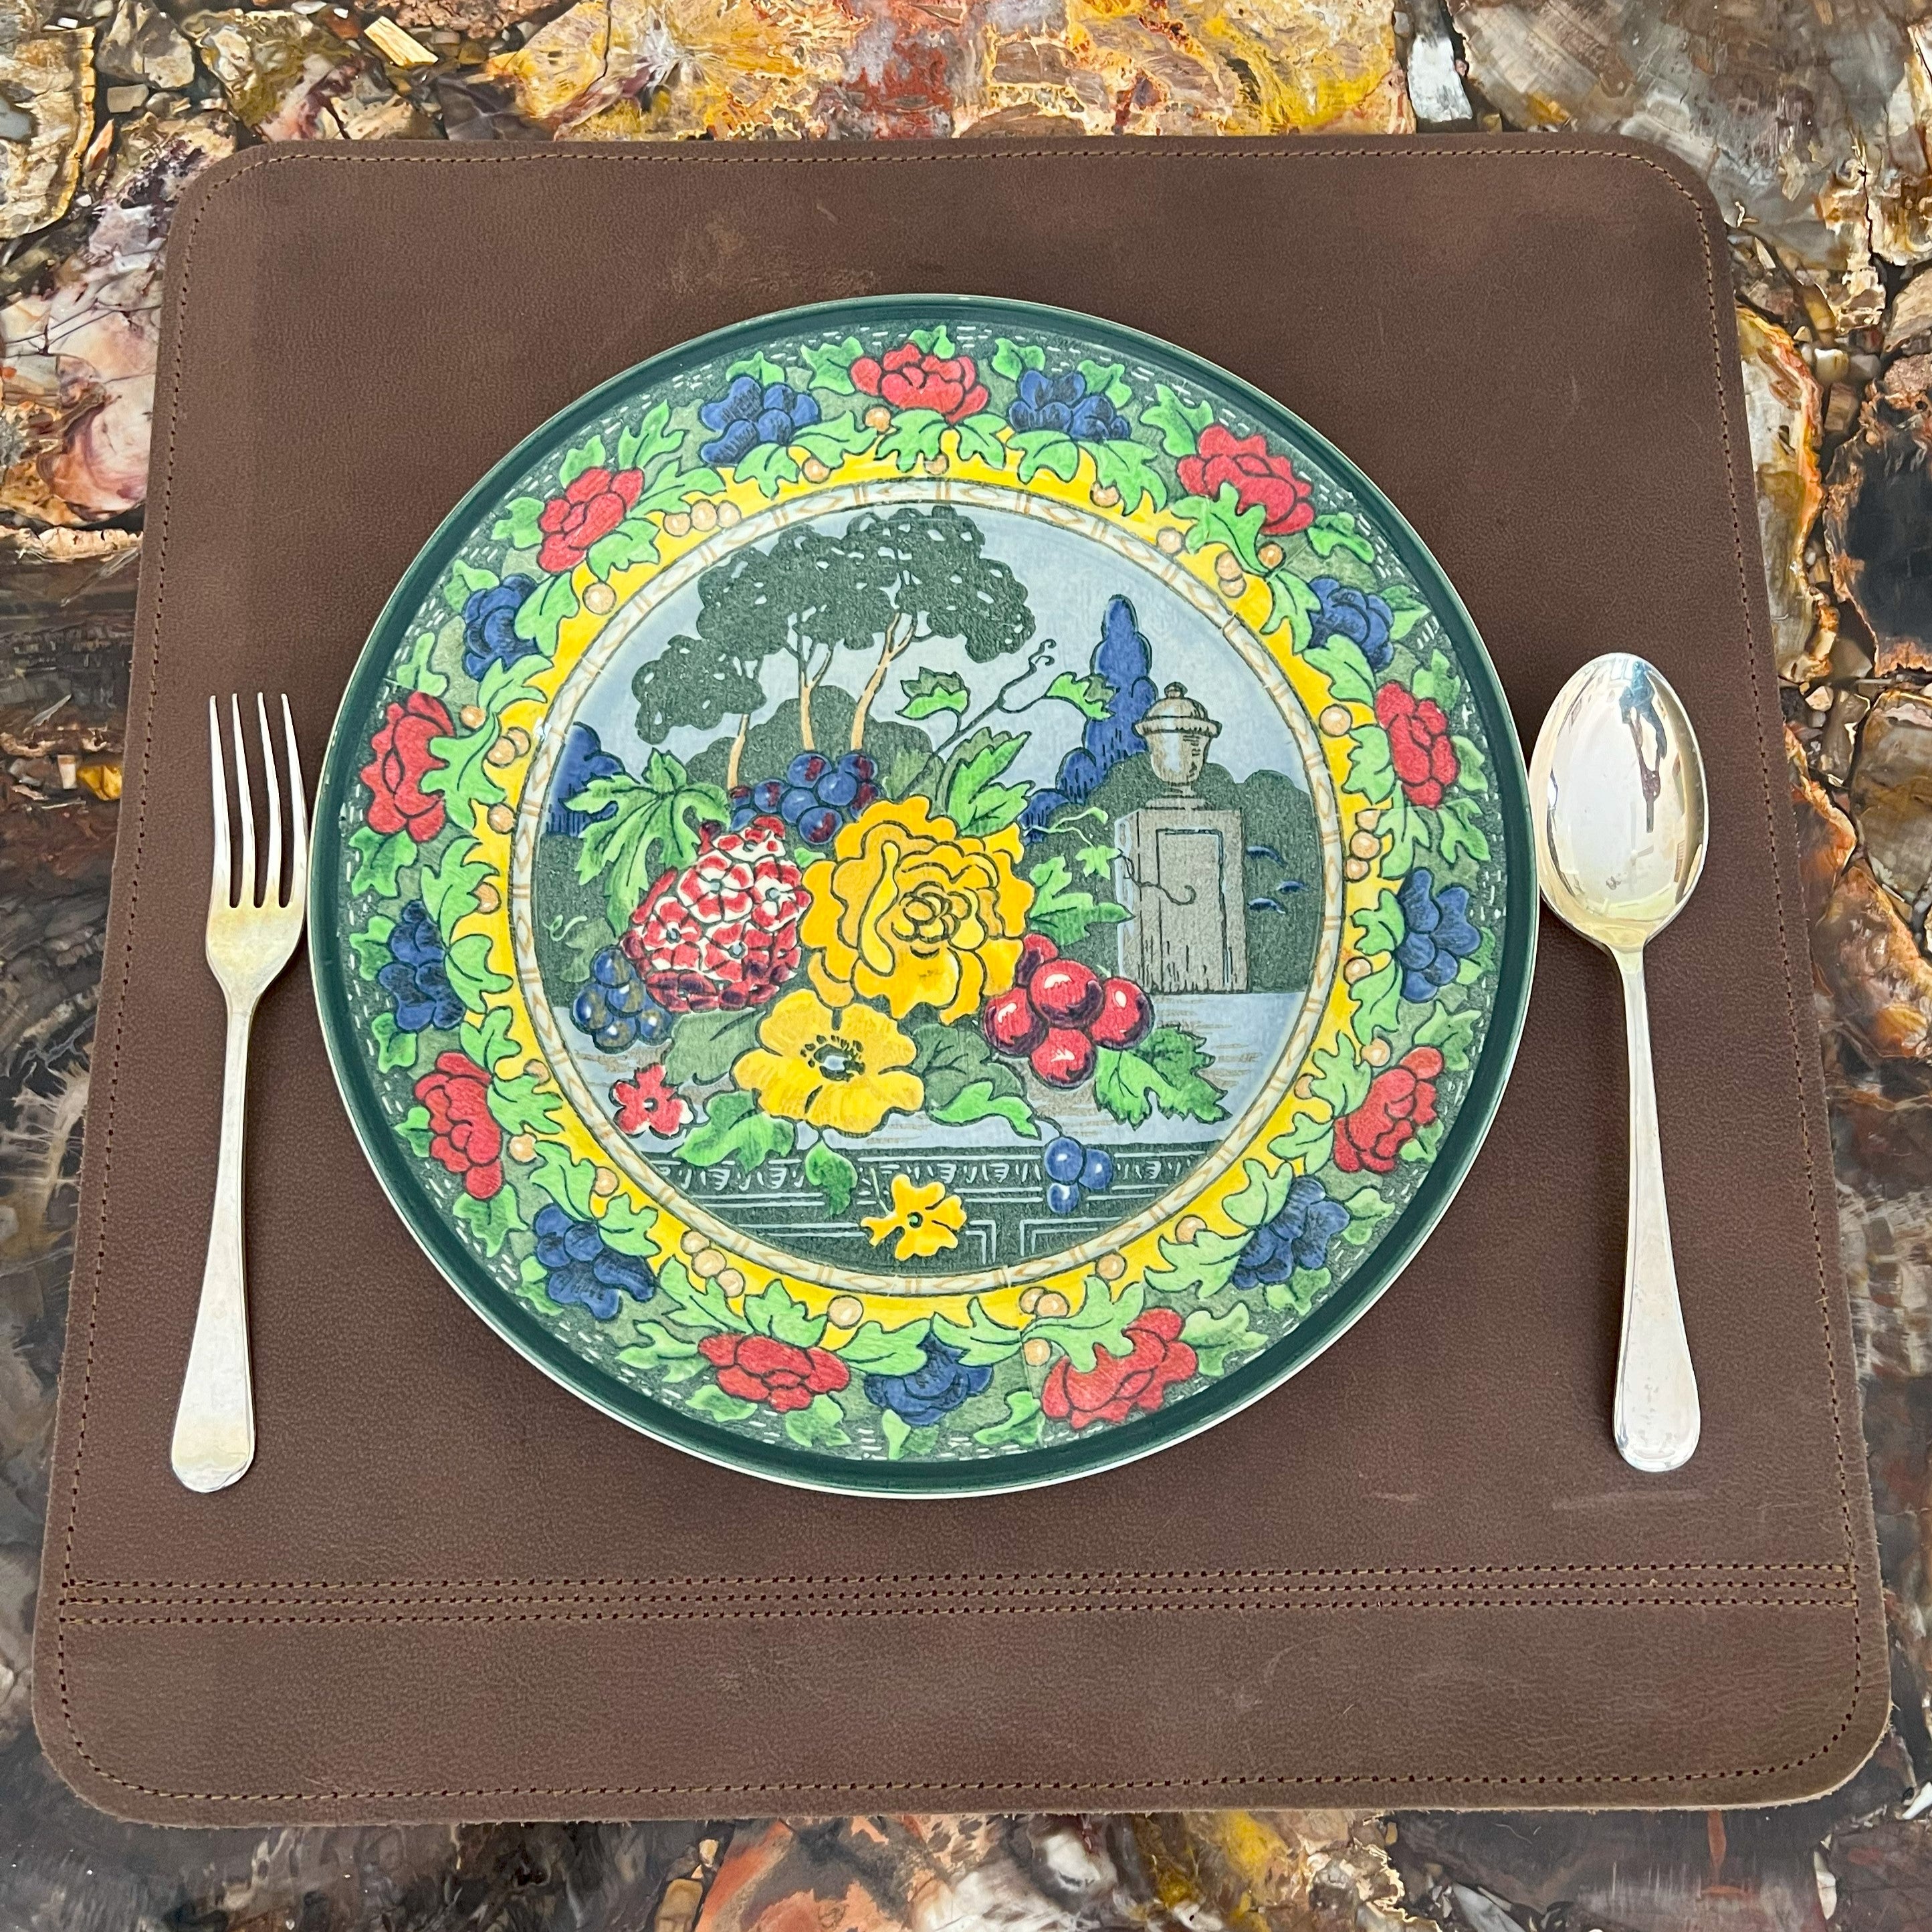 A decorative plate with vibrant floral and Hebrew text designs is set on a LIMITED EDITION buffalo leather Dinner Mat - classic - set of 2, flanked by a fork on the left and a spoon on the right, on a rustic table.